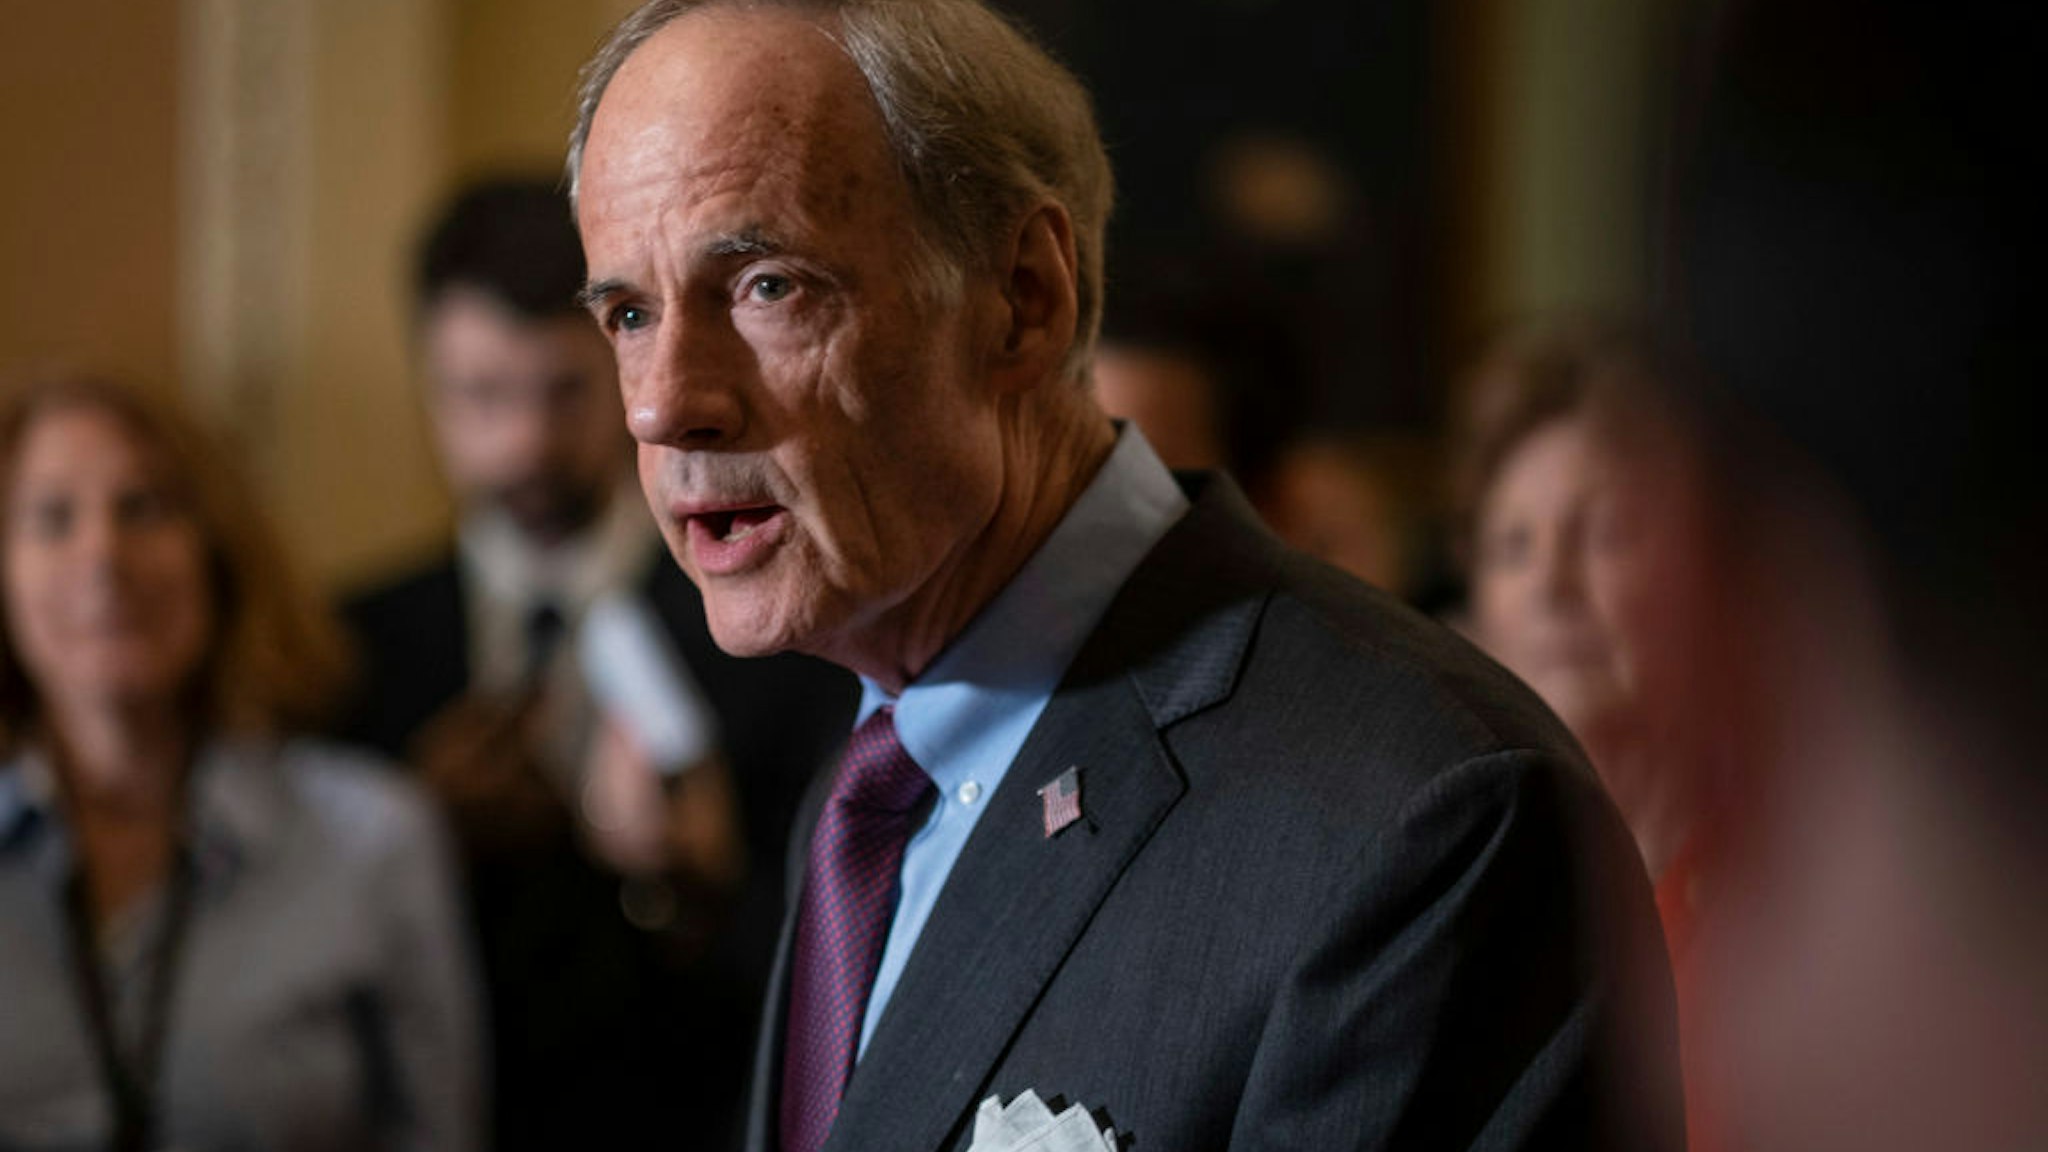 Senator Tom Carper (D-DE), speaks to the media during a press conference following the Senate Republican Leadership lunches on July 16, 2019 in Washington, DC.